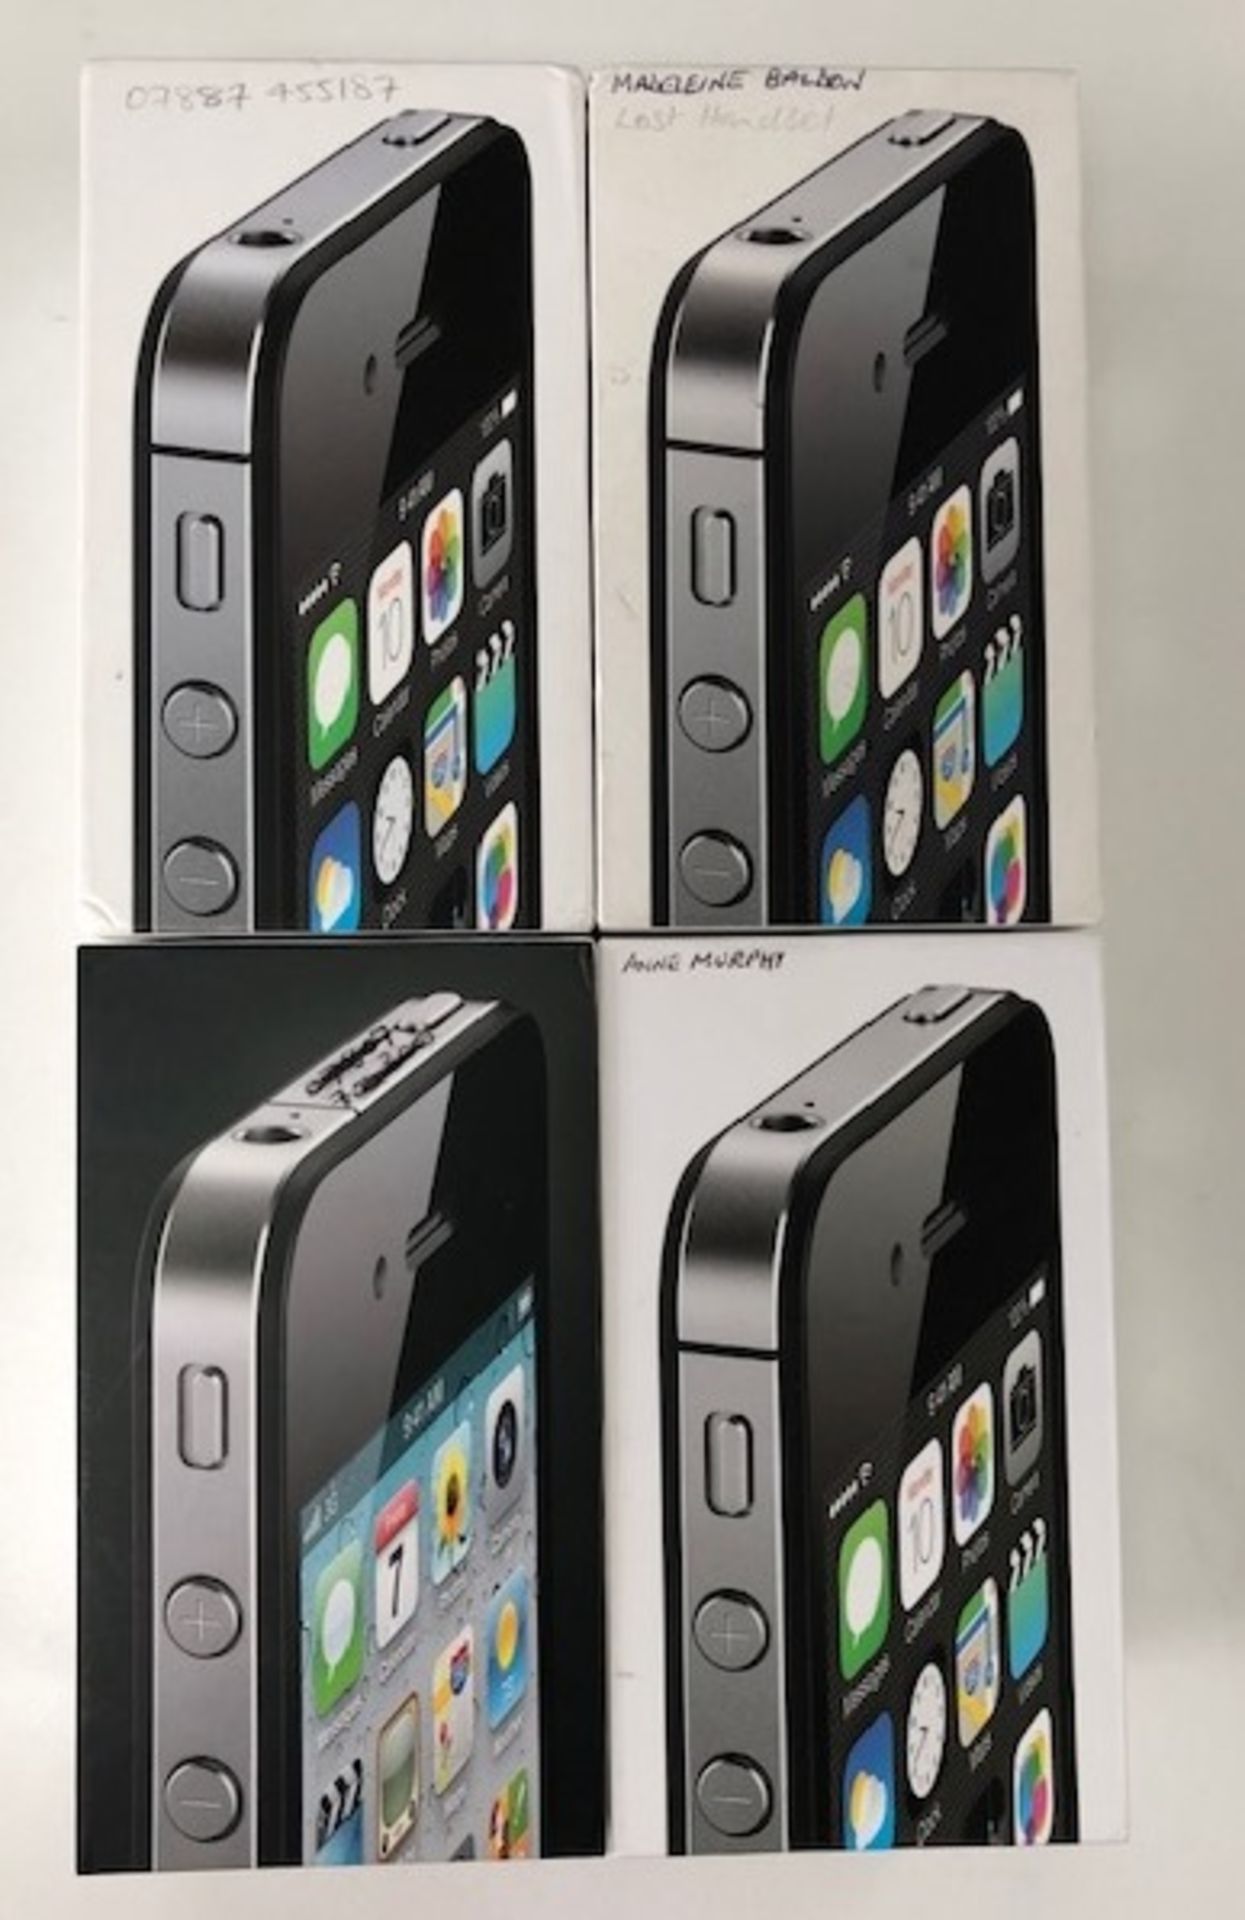 4 x Apple 8GB iPhone 4/4s Mobile Phones | IN BOXES | NO CHARGERS - Image 2 of 4